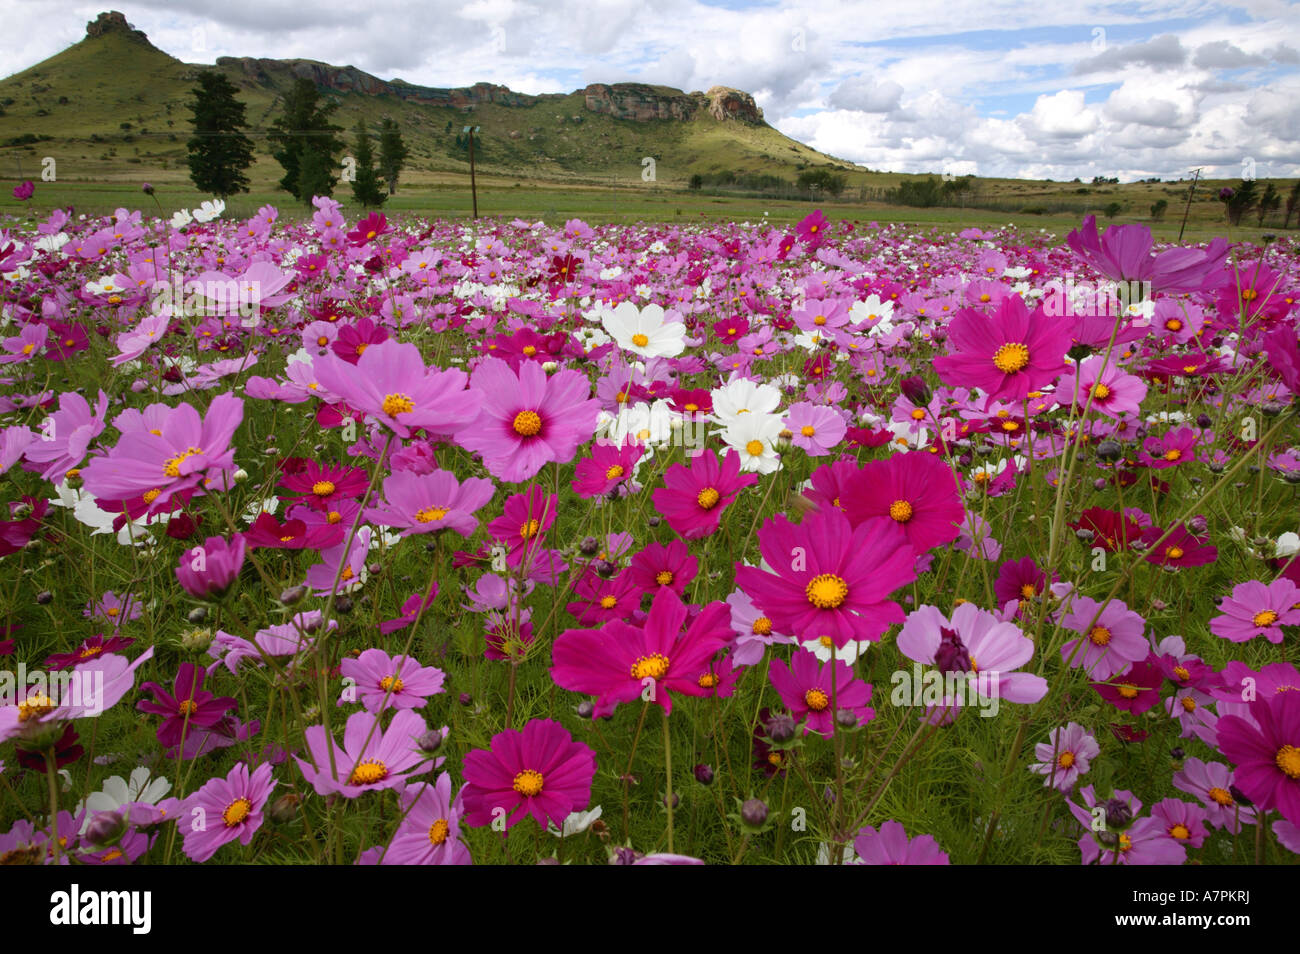 Cosmos flowers growing in a field in the Eastern Free State South